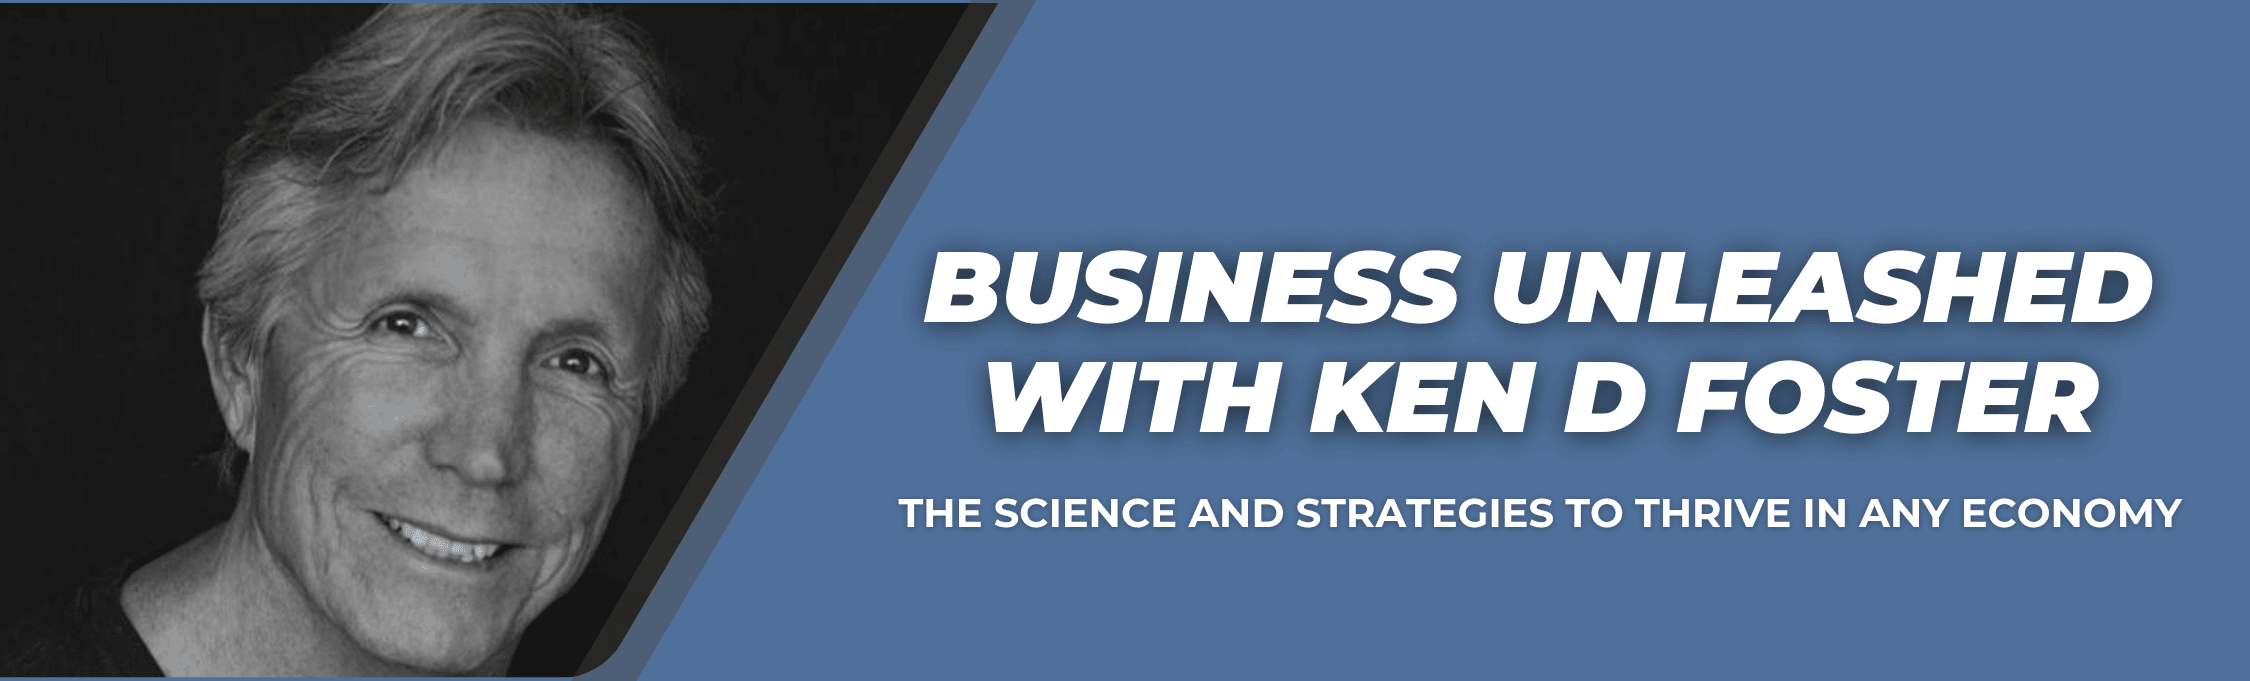 Business Unleashed with Ken D Foster